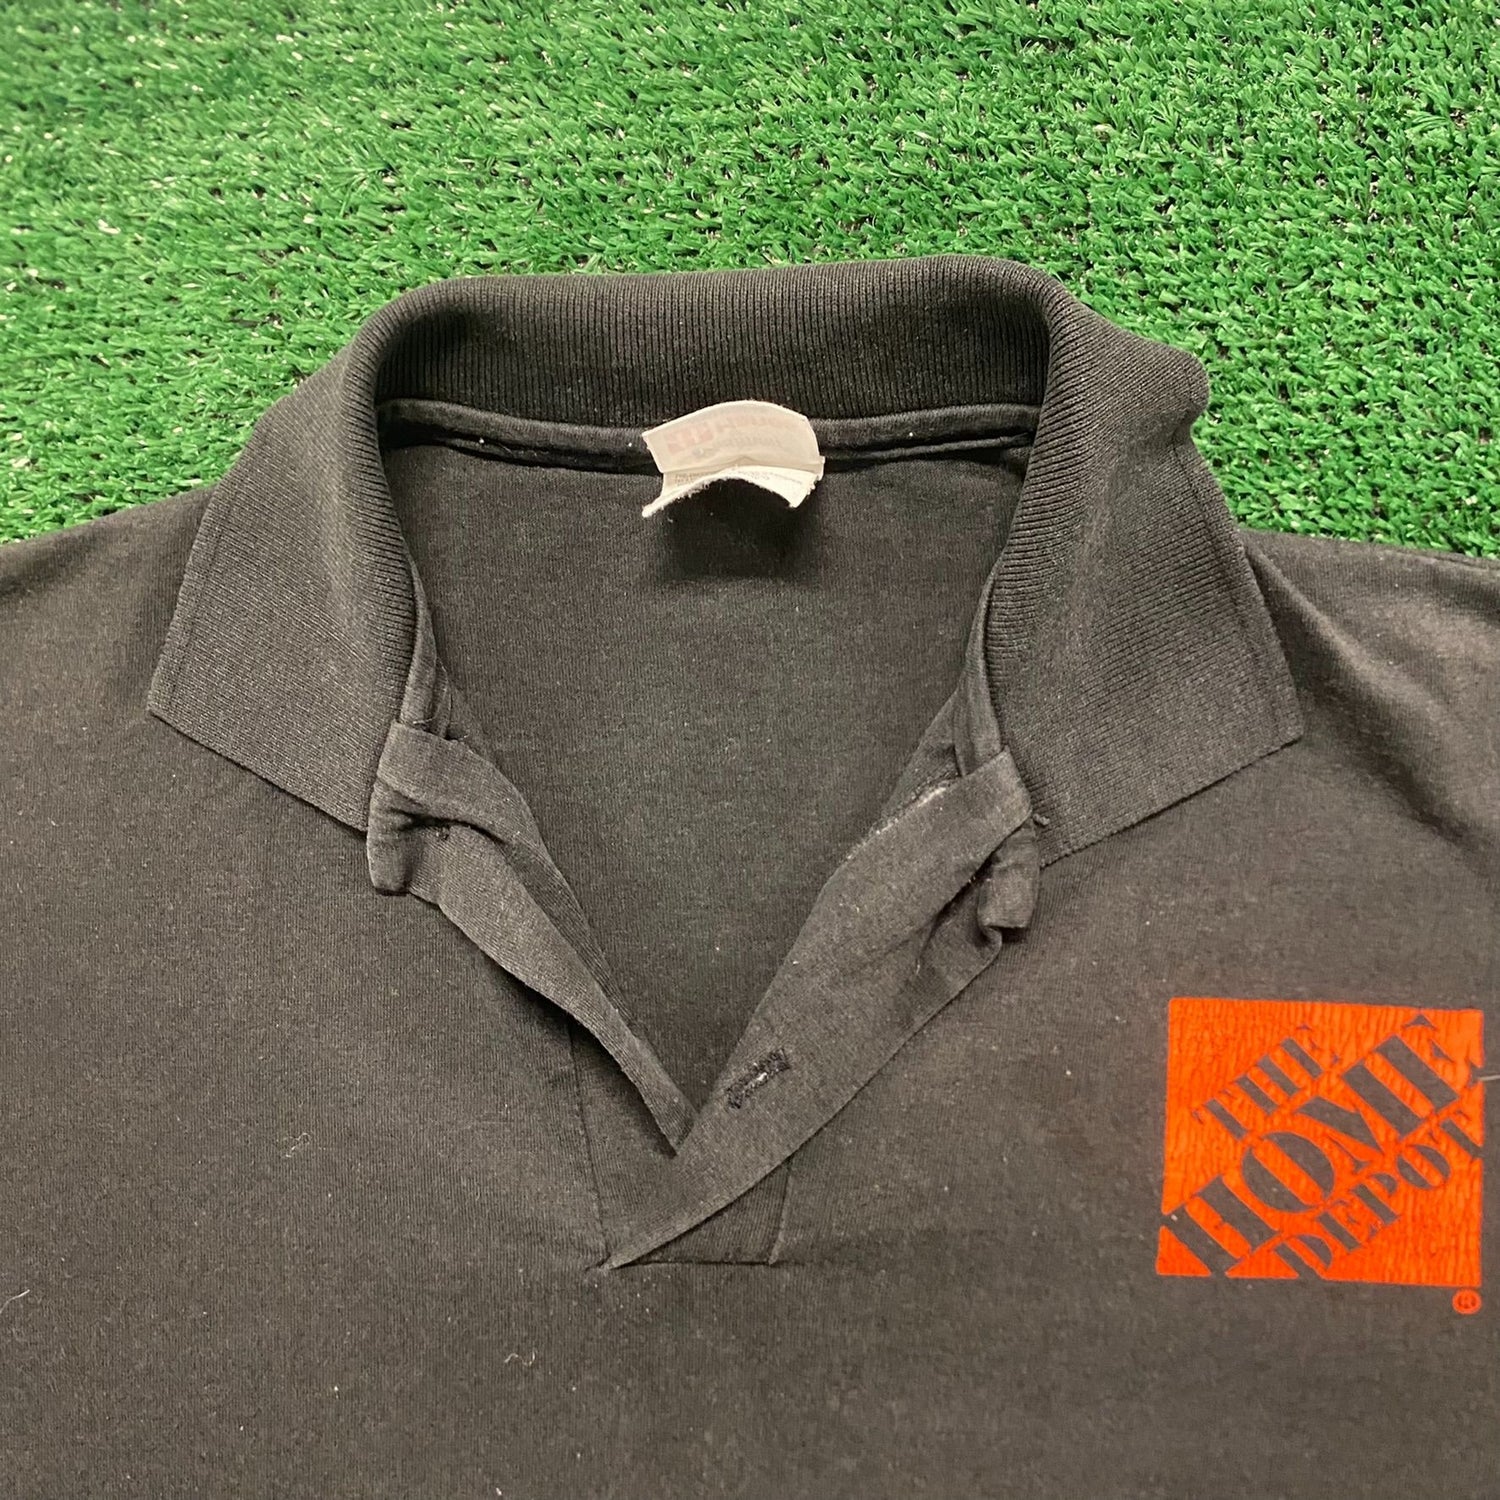 Home Depot Star Wars Vintage Polo Shirt – Agent Thrift